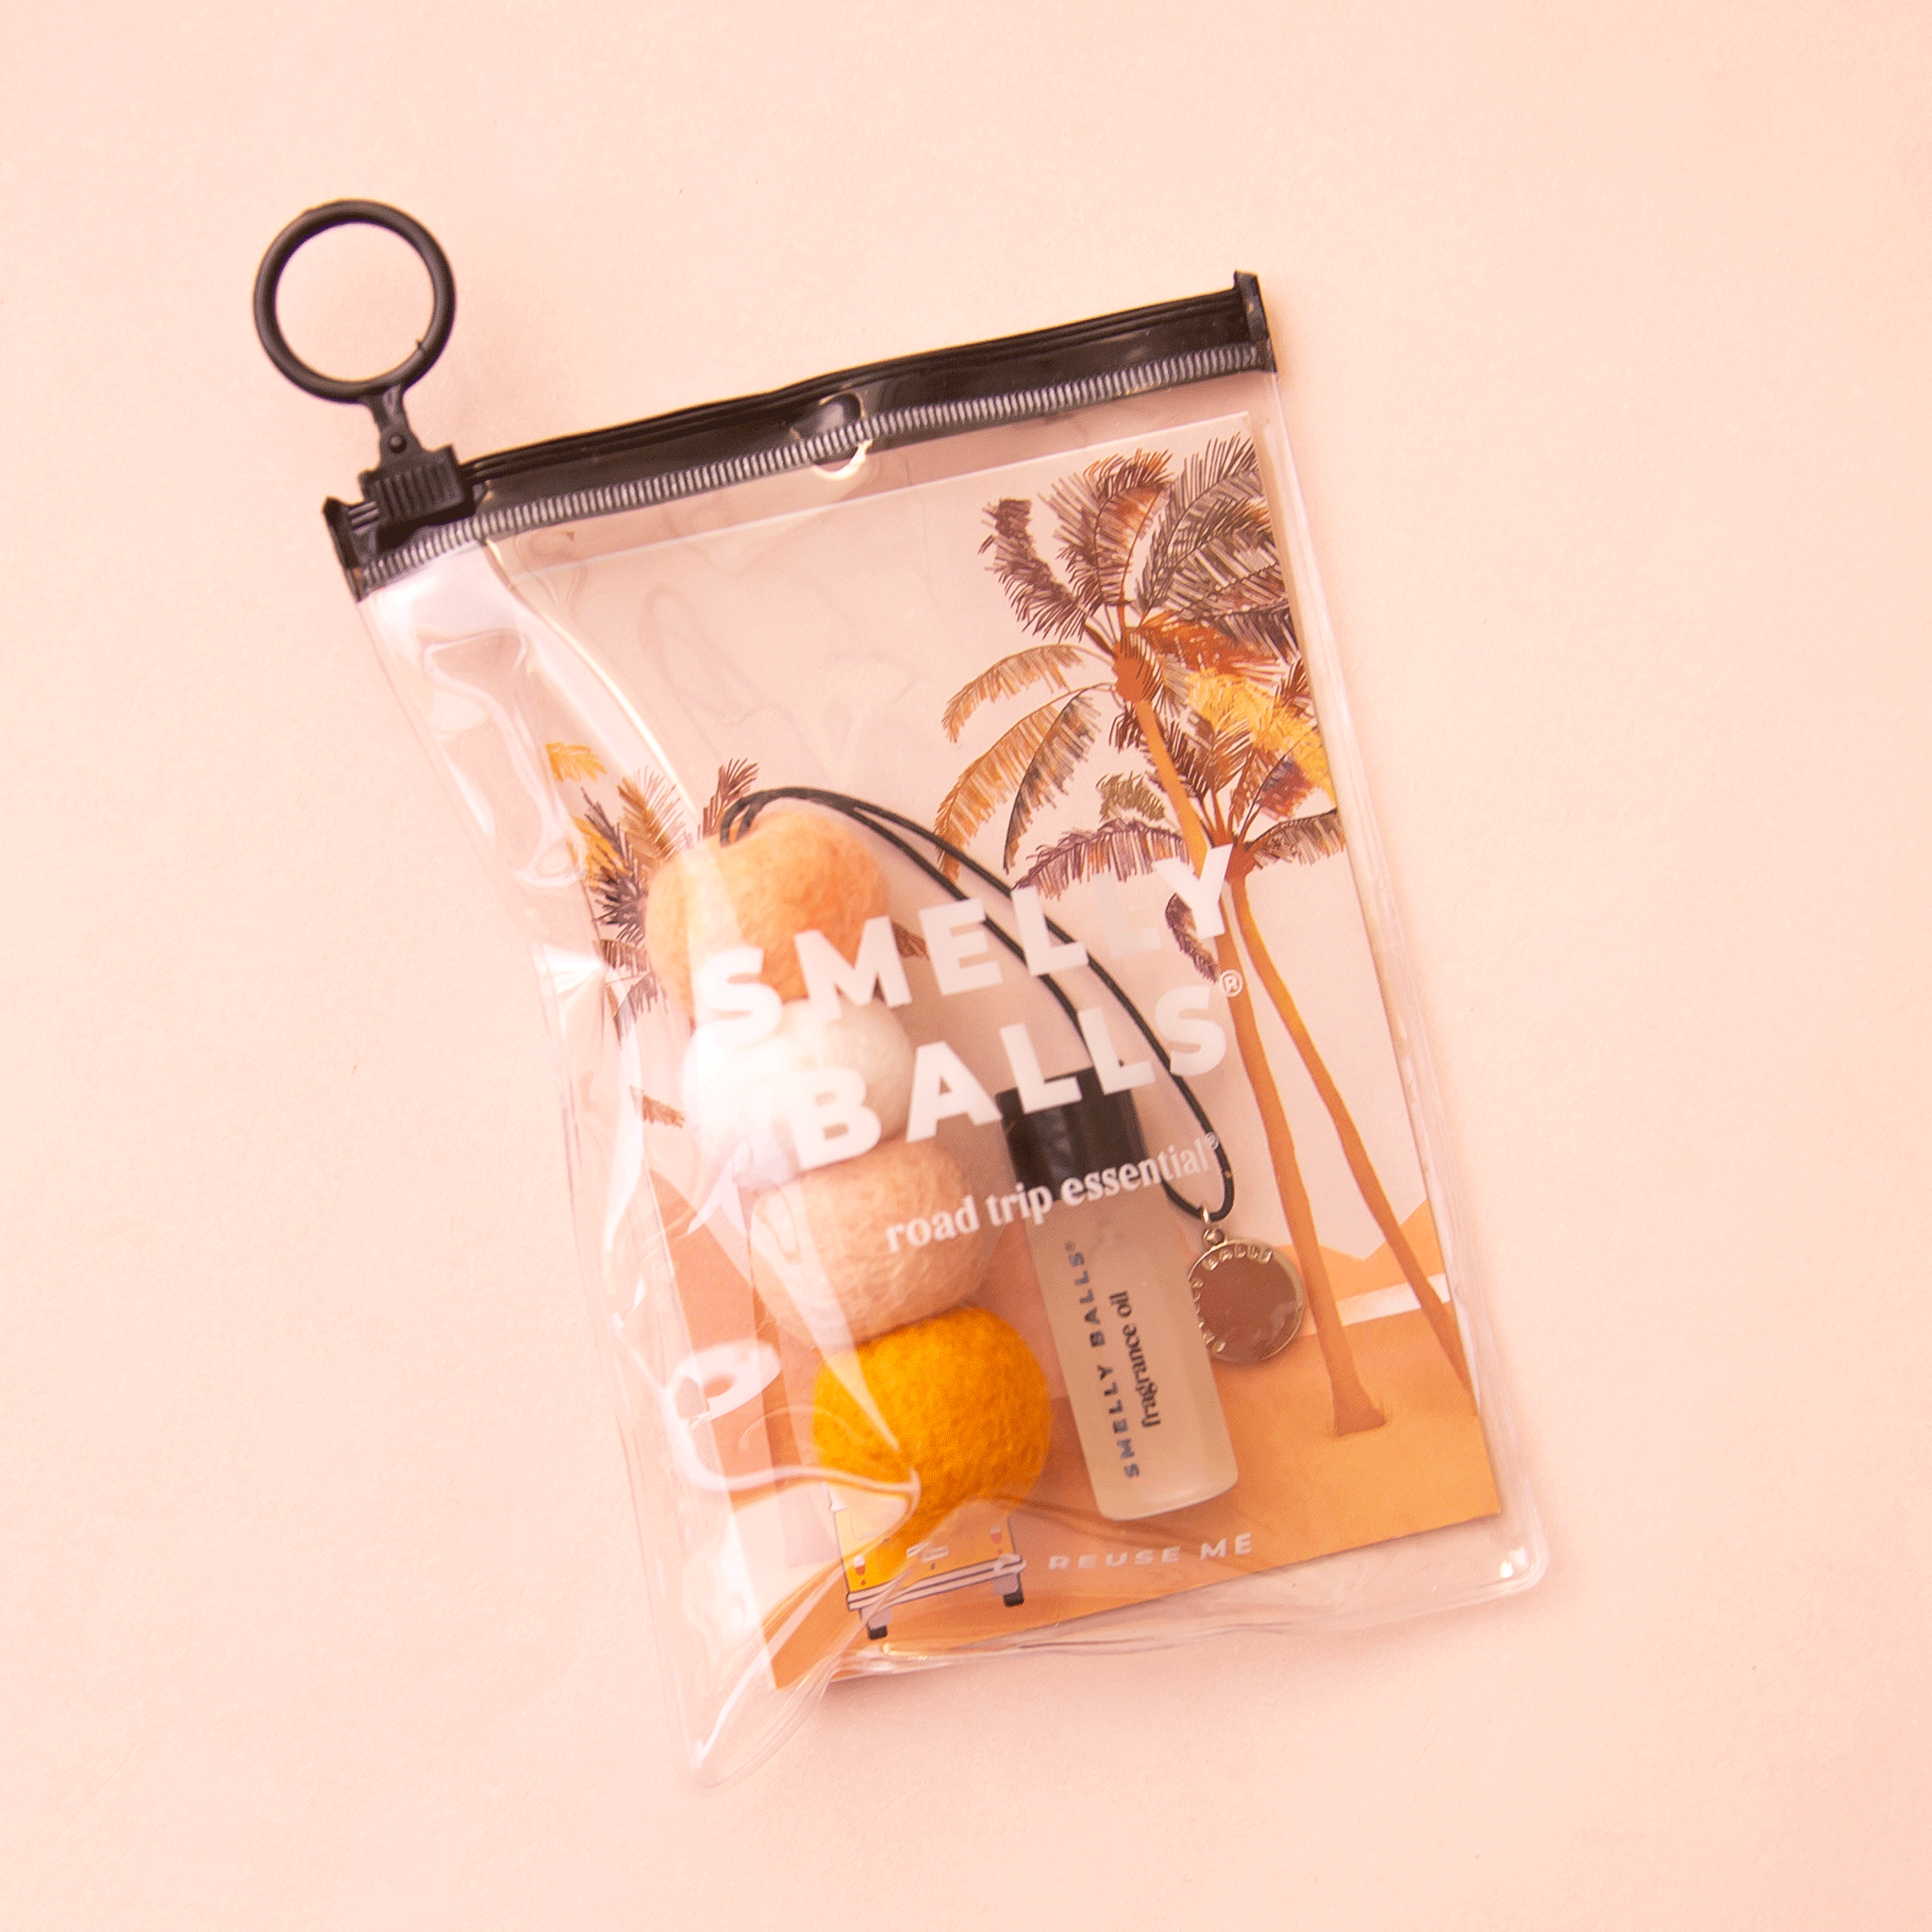 On a peachy background is a clear pouch with a black zipper filled with four small wool balls made into an air freshener with a small bottle of fragrance oil next to it.